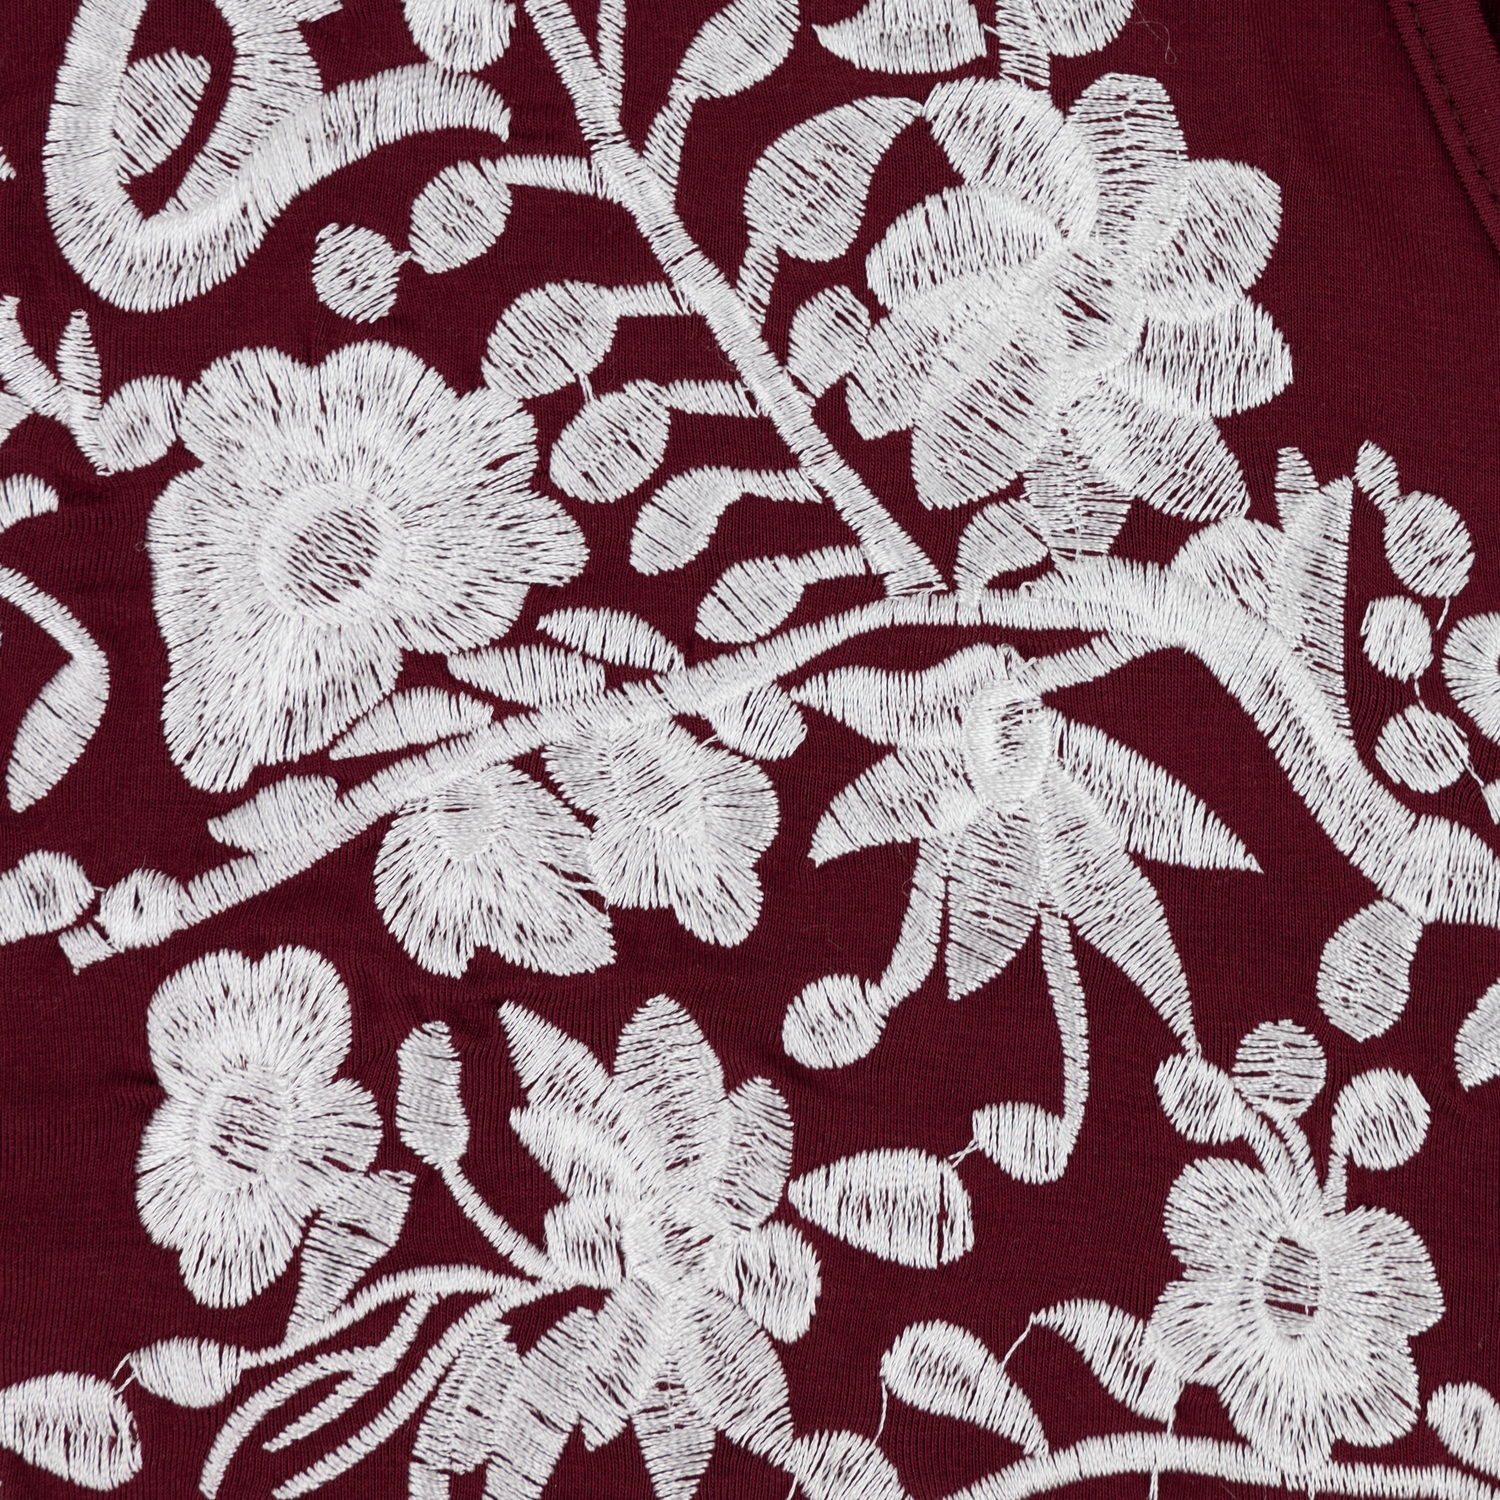 Floral Embroidered Peek-A-Boo Maroon Blouse